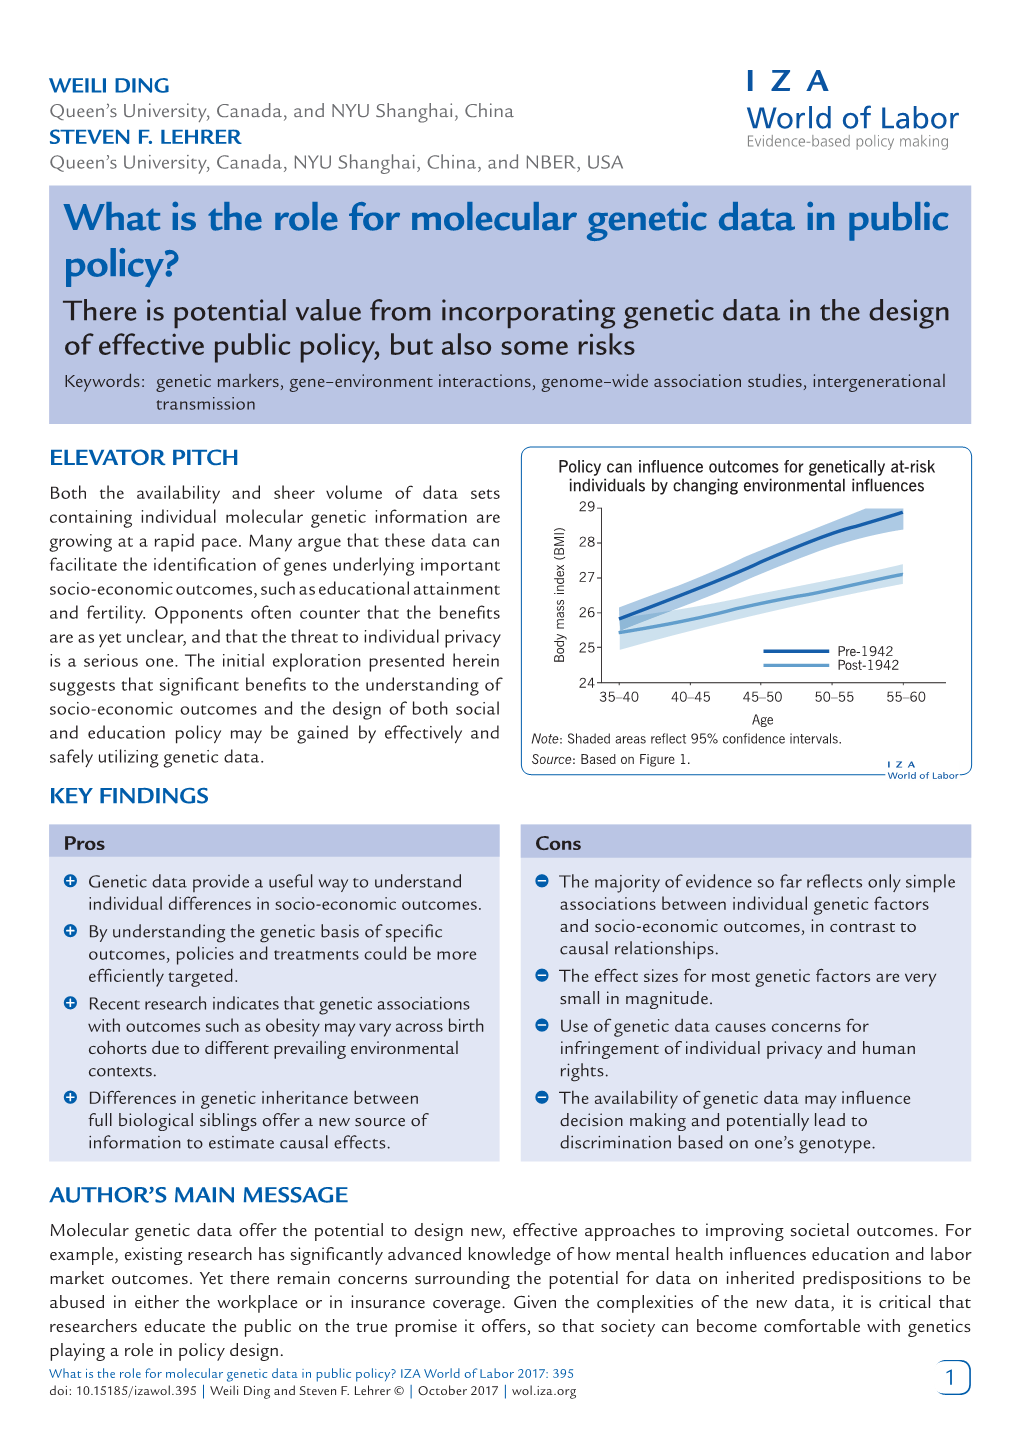 What Is the Role for Molecular Genetic Data in Public Policy?